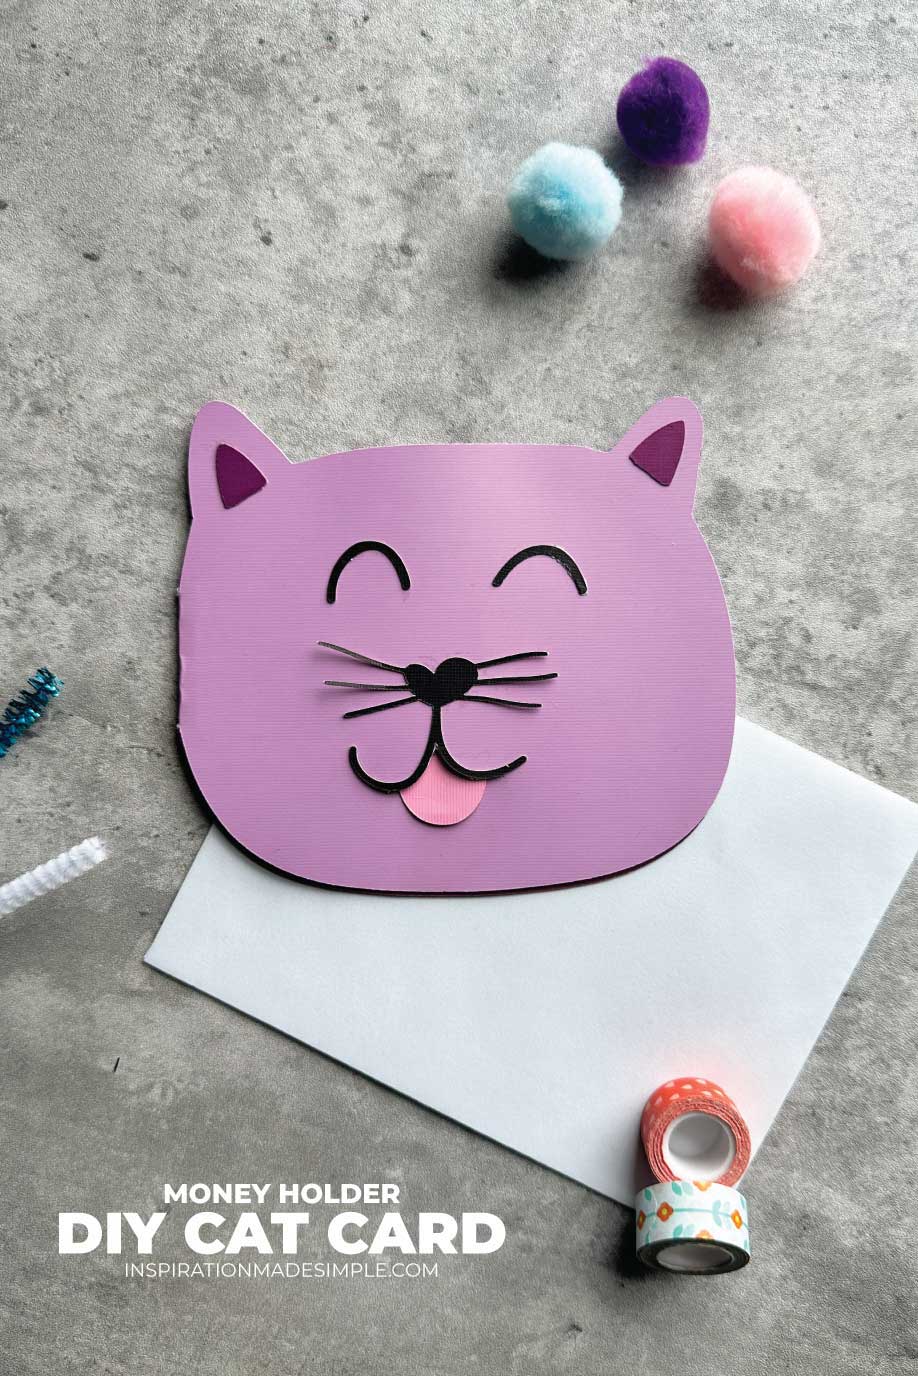 DIY Cat Card with Pull Tongue Money Holder